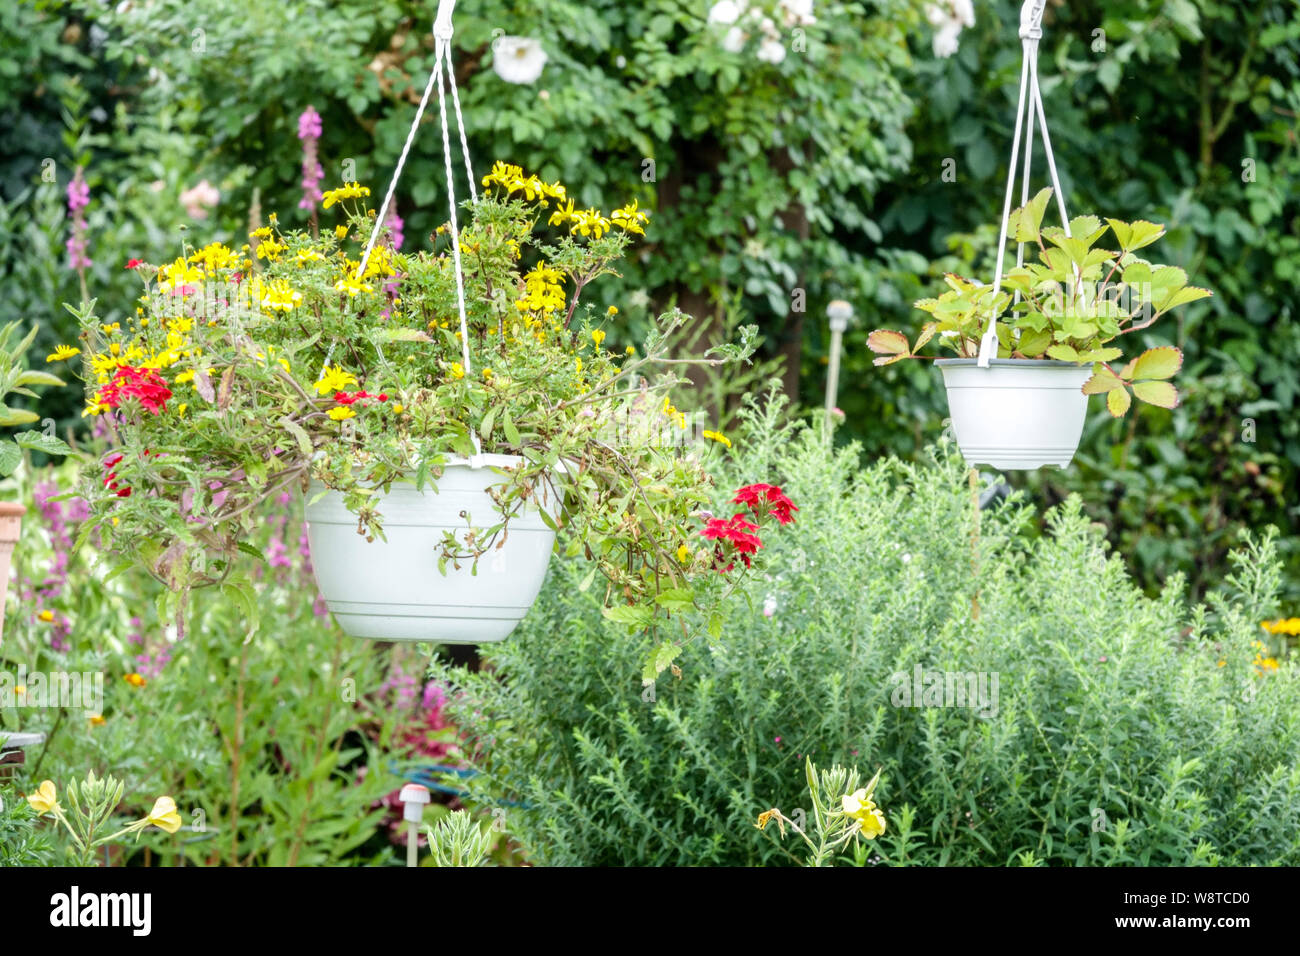 Hanging pots with colorful plants in august garden flowers Stock Photo